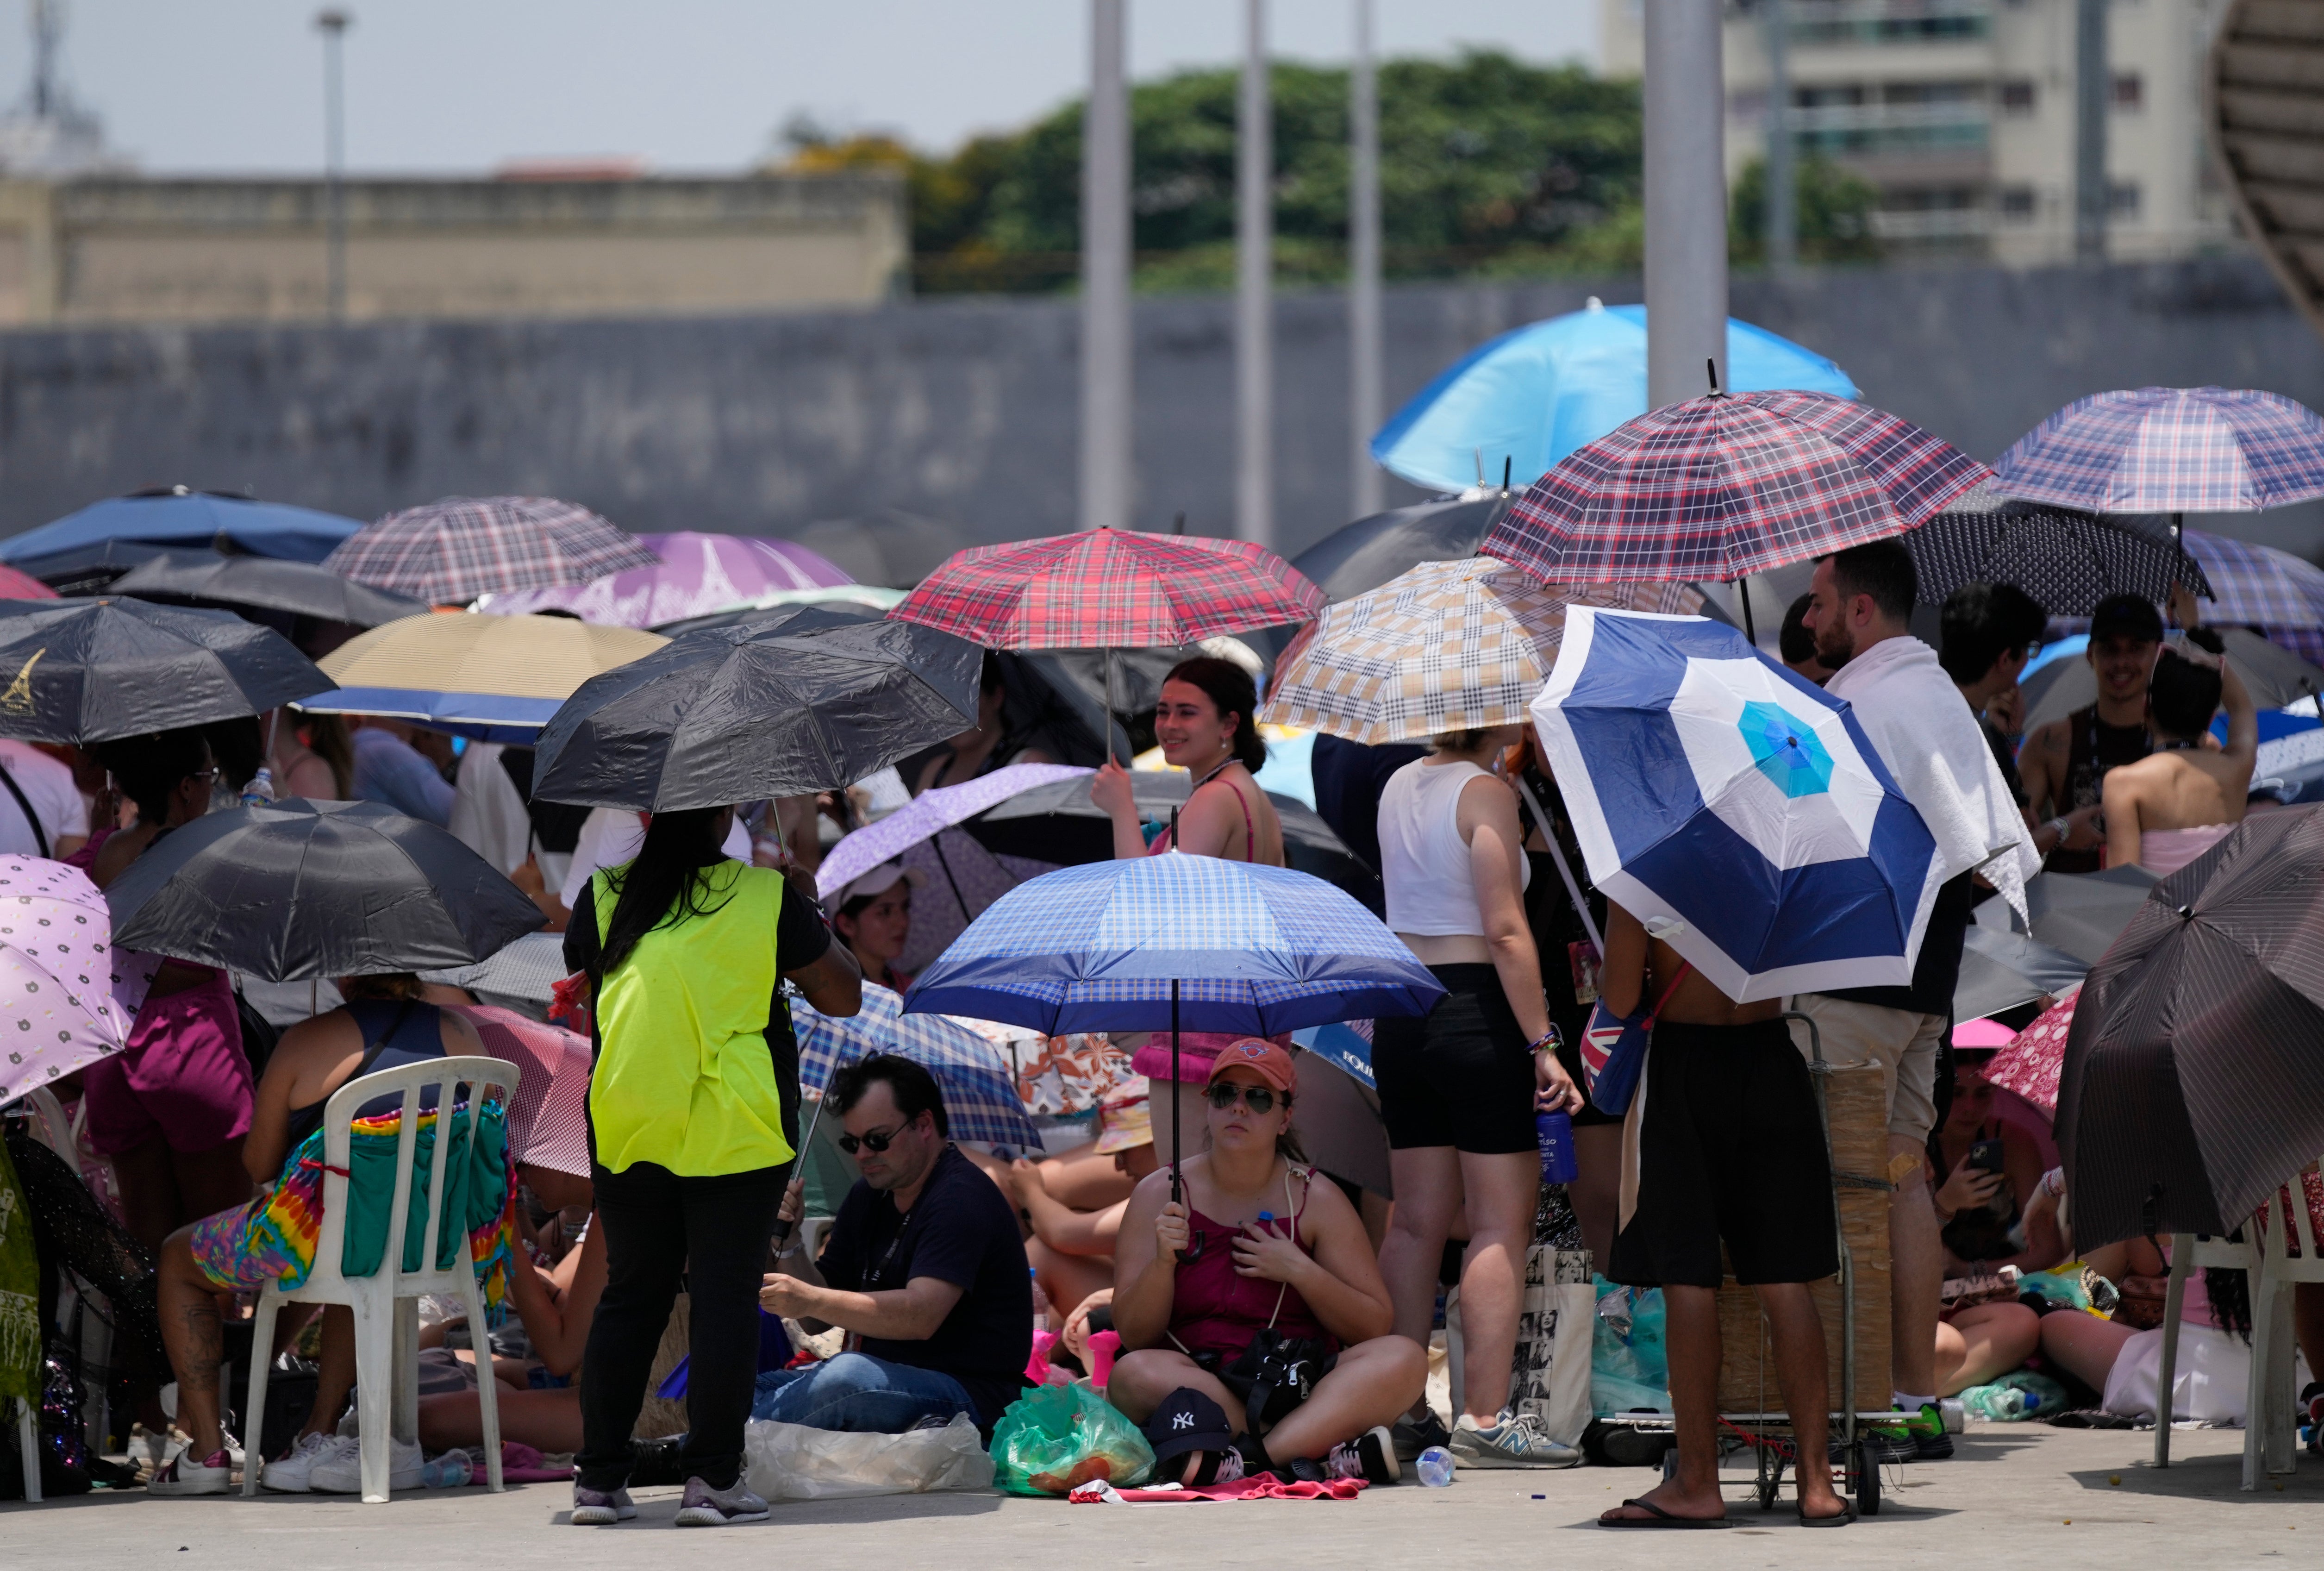 Taylor Swift fans wait for the doors of Nilton Santos Olympic stadium to open for her Eras Tour concert amid a heat wave in Rio de Janeiro, Brazil, 18 November 2023